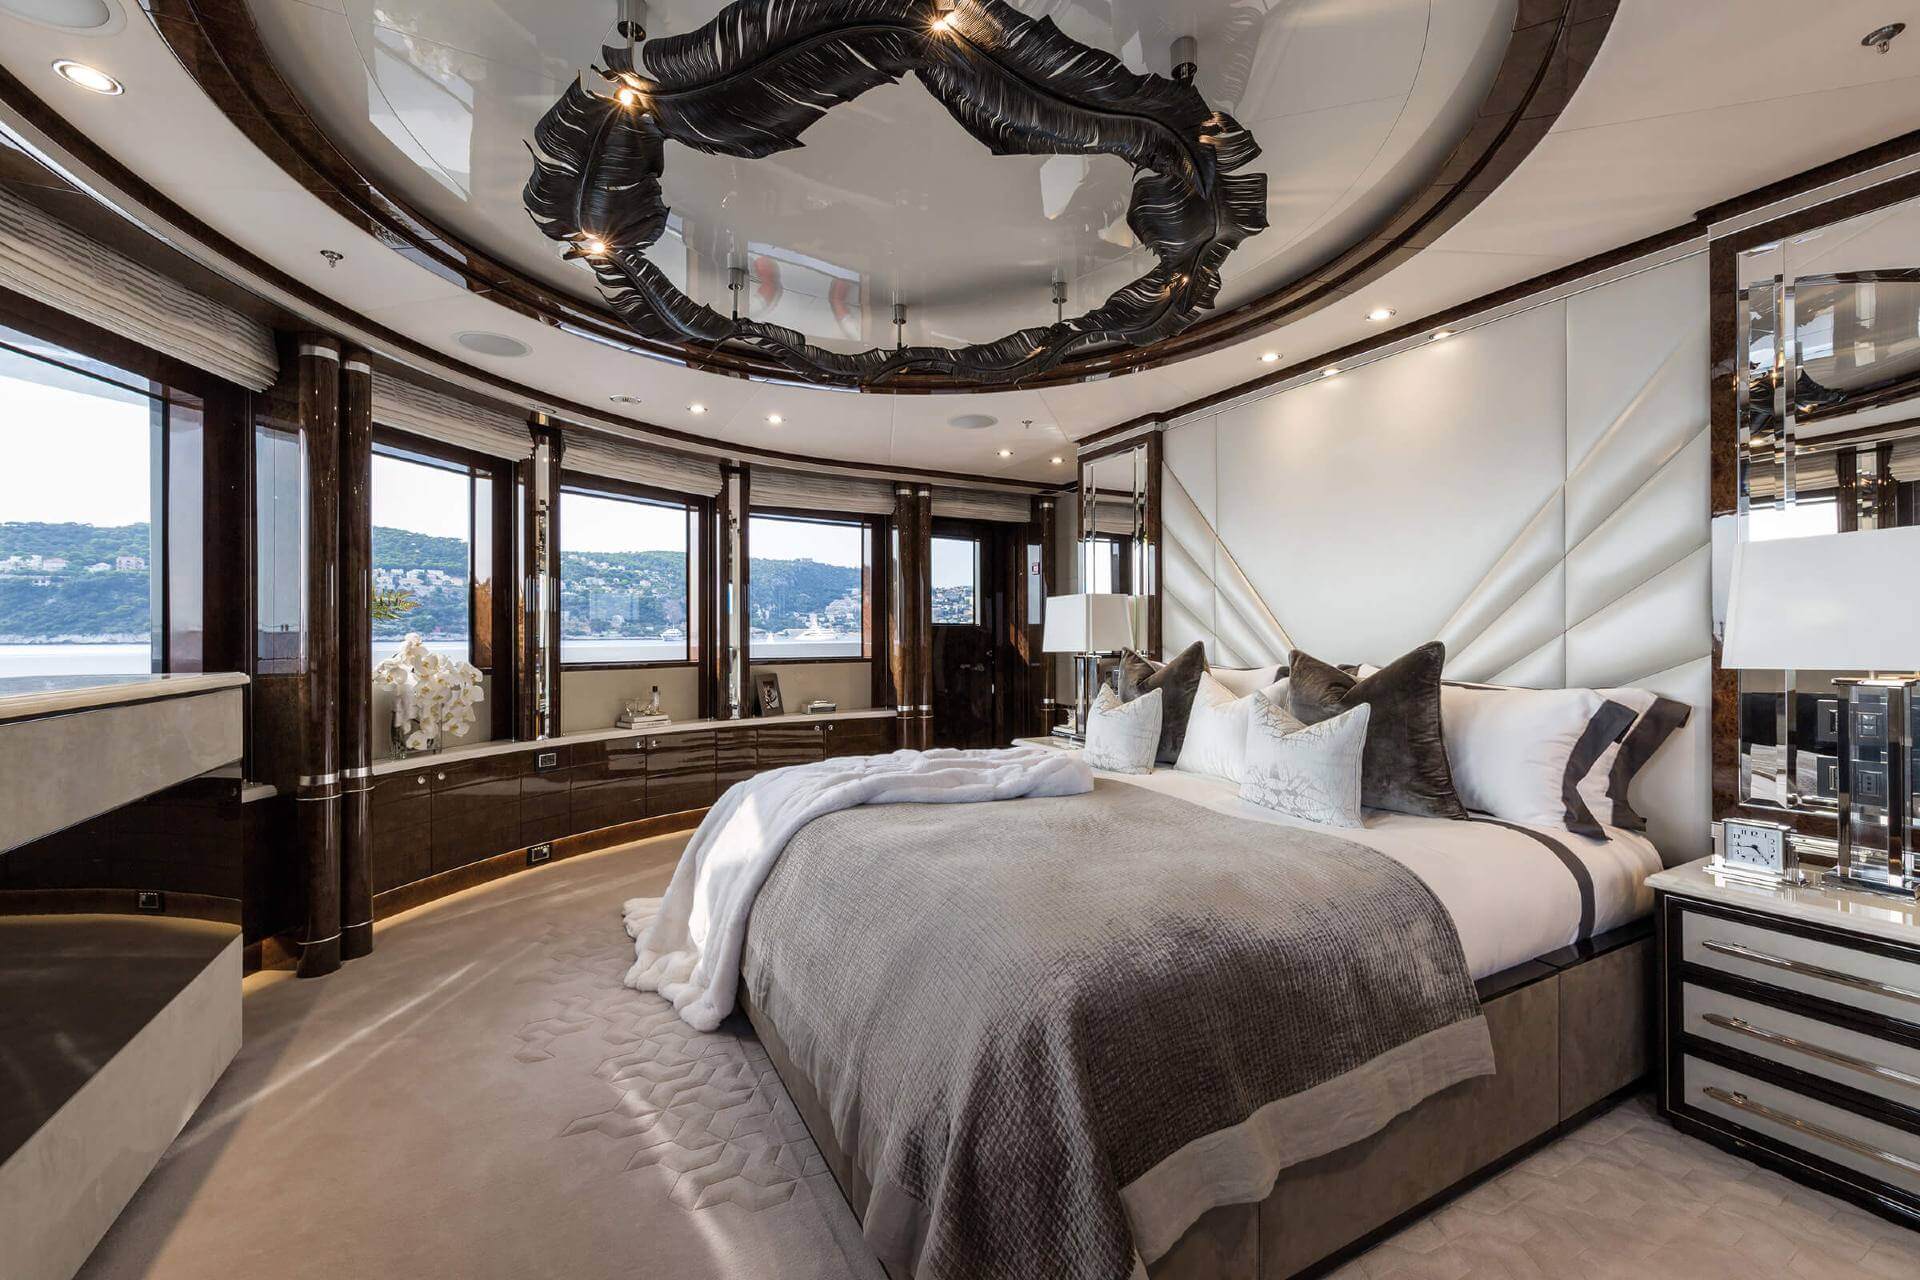 changing bed linens on a yacht luxurious master bedroom